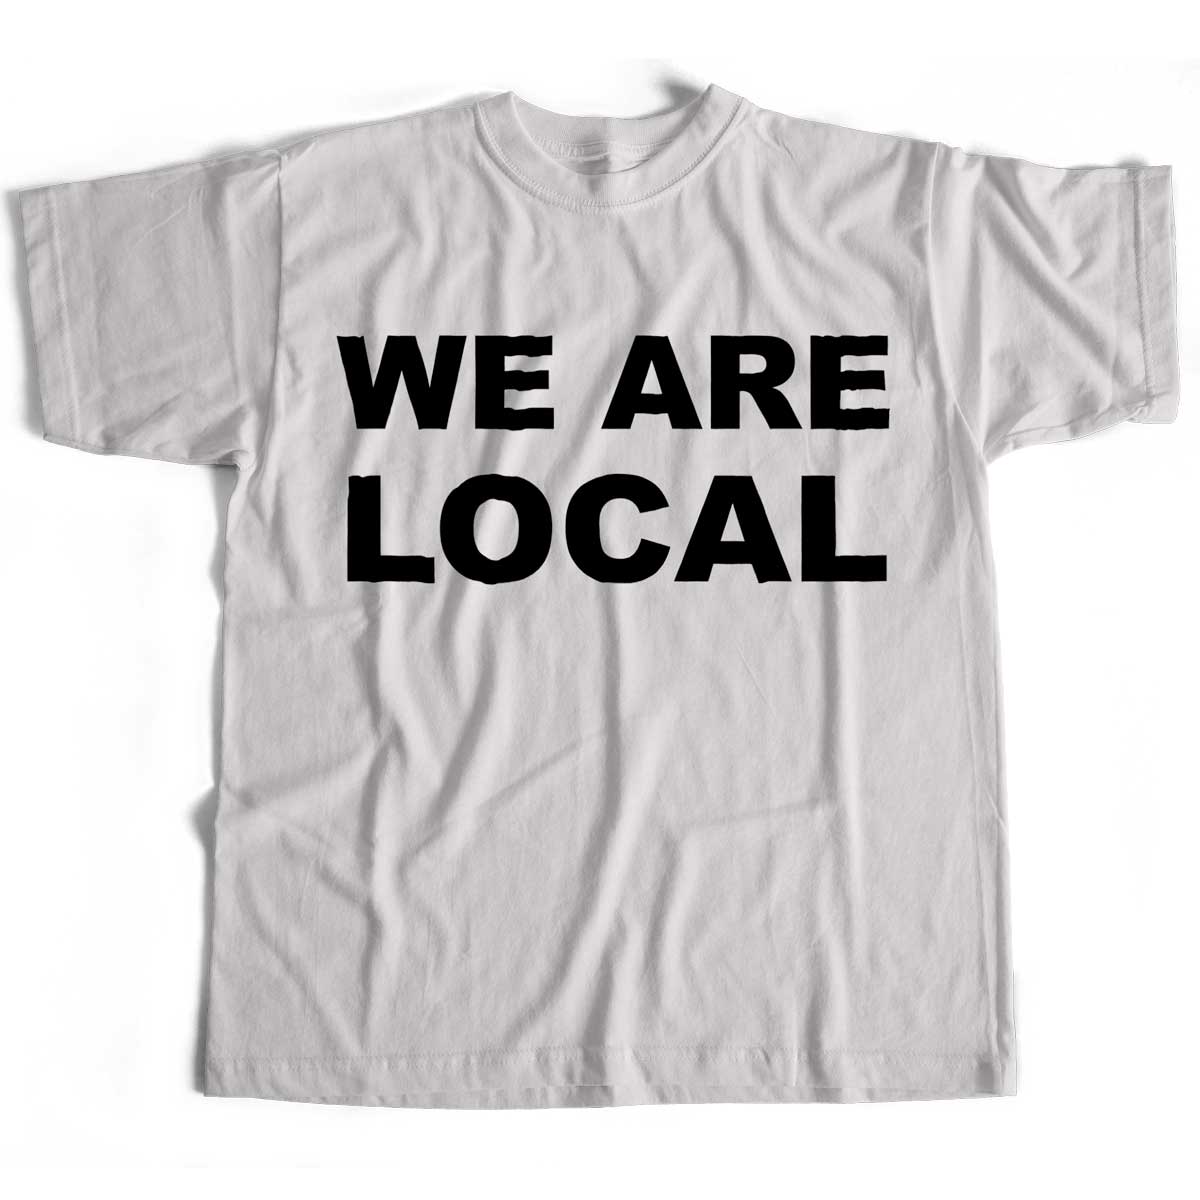 Inspired by the League Of Gentlemen - We Are Local T shirt An Old Skool Hooligans Comedy Original